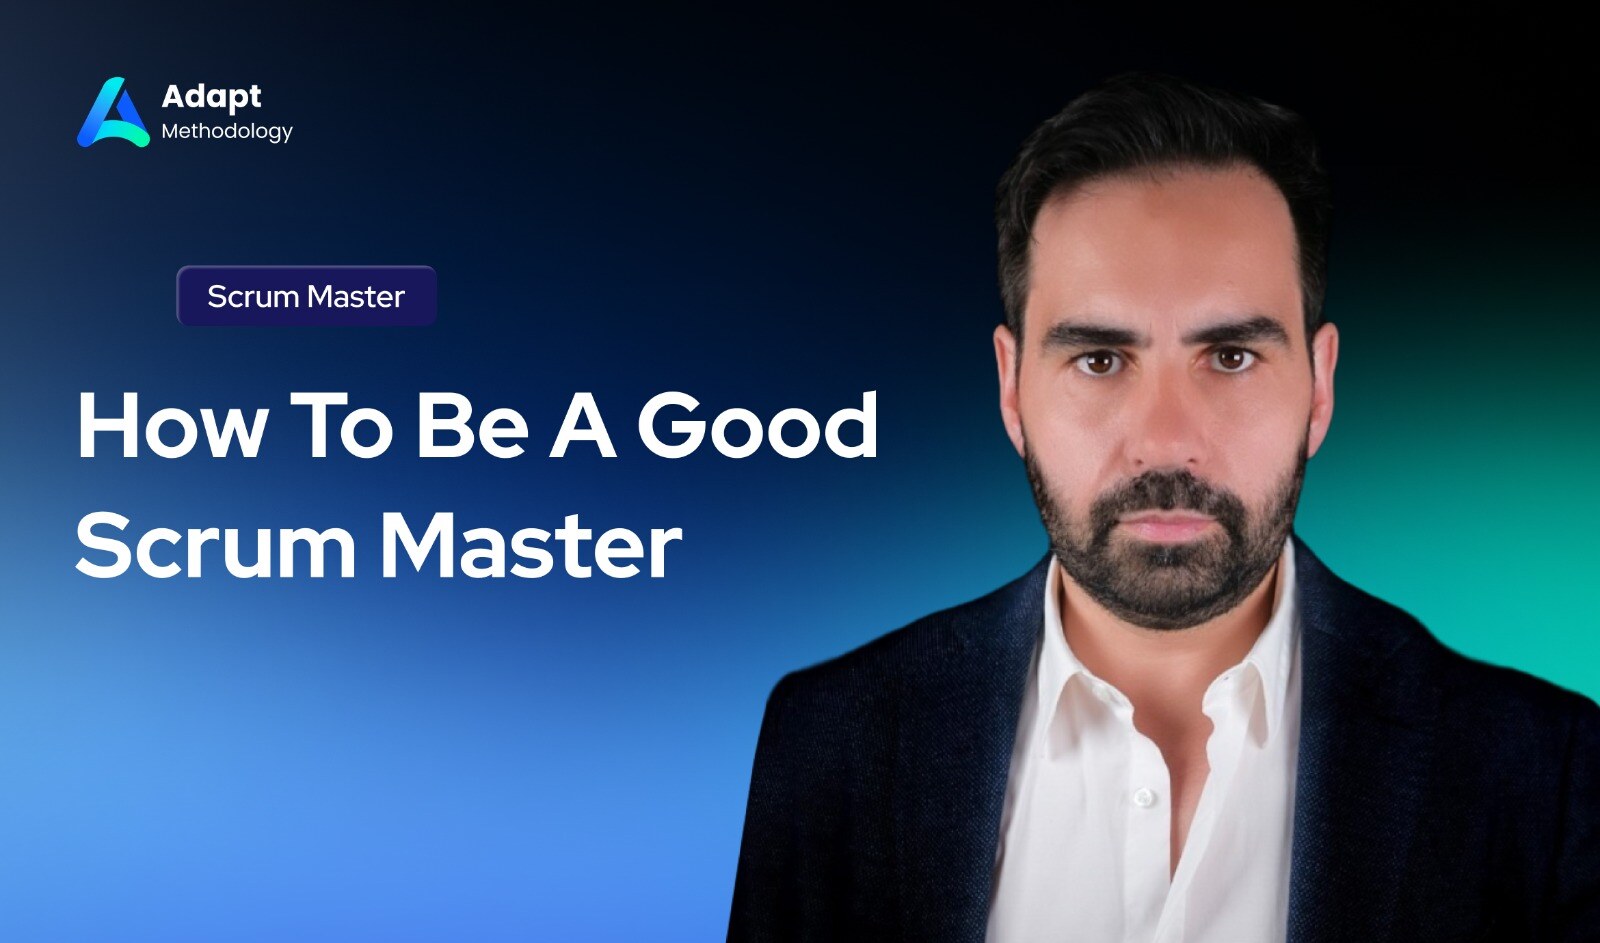 How To Be A Good Scrum Master